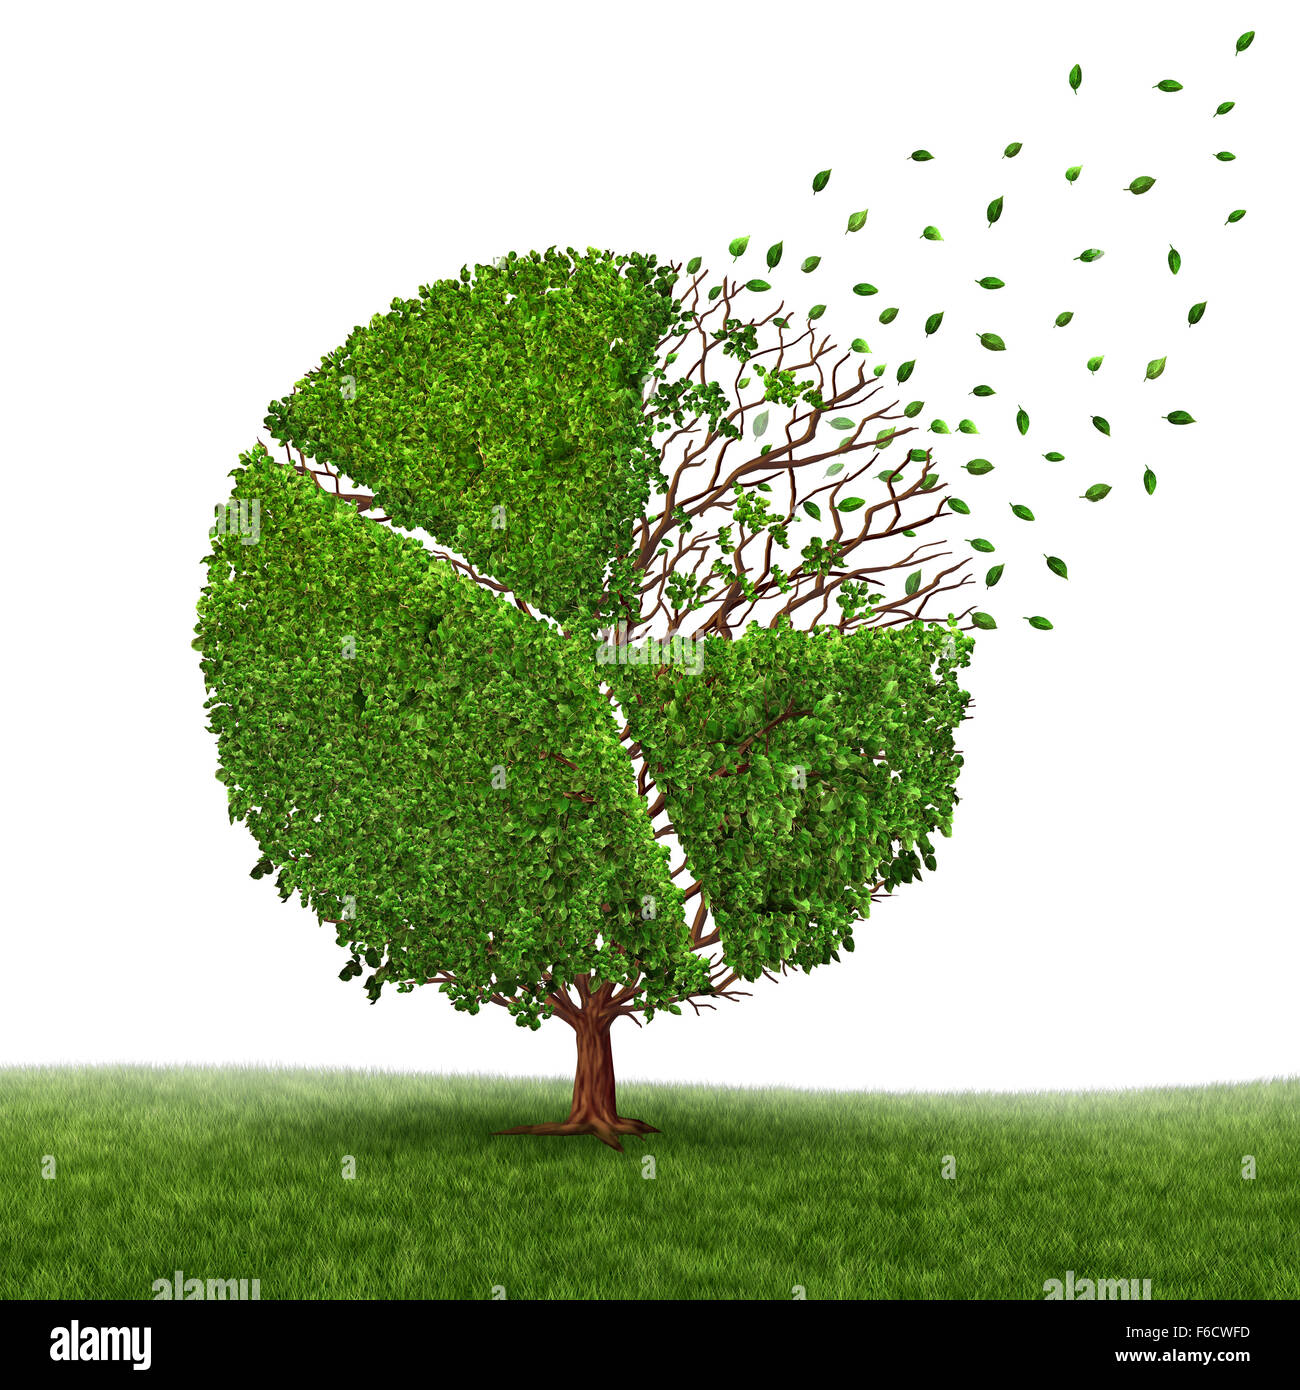 Financial market loss and losing profit as a pie chart in a tree growing green leaves falling off as a business concept of competition pressure as a corporate graph symbol of economic challenges and change on a white background. Stock Photo